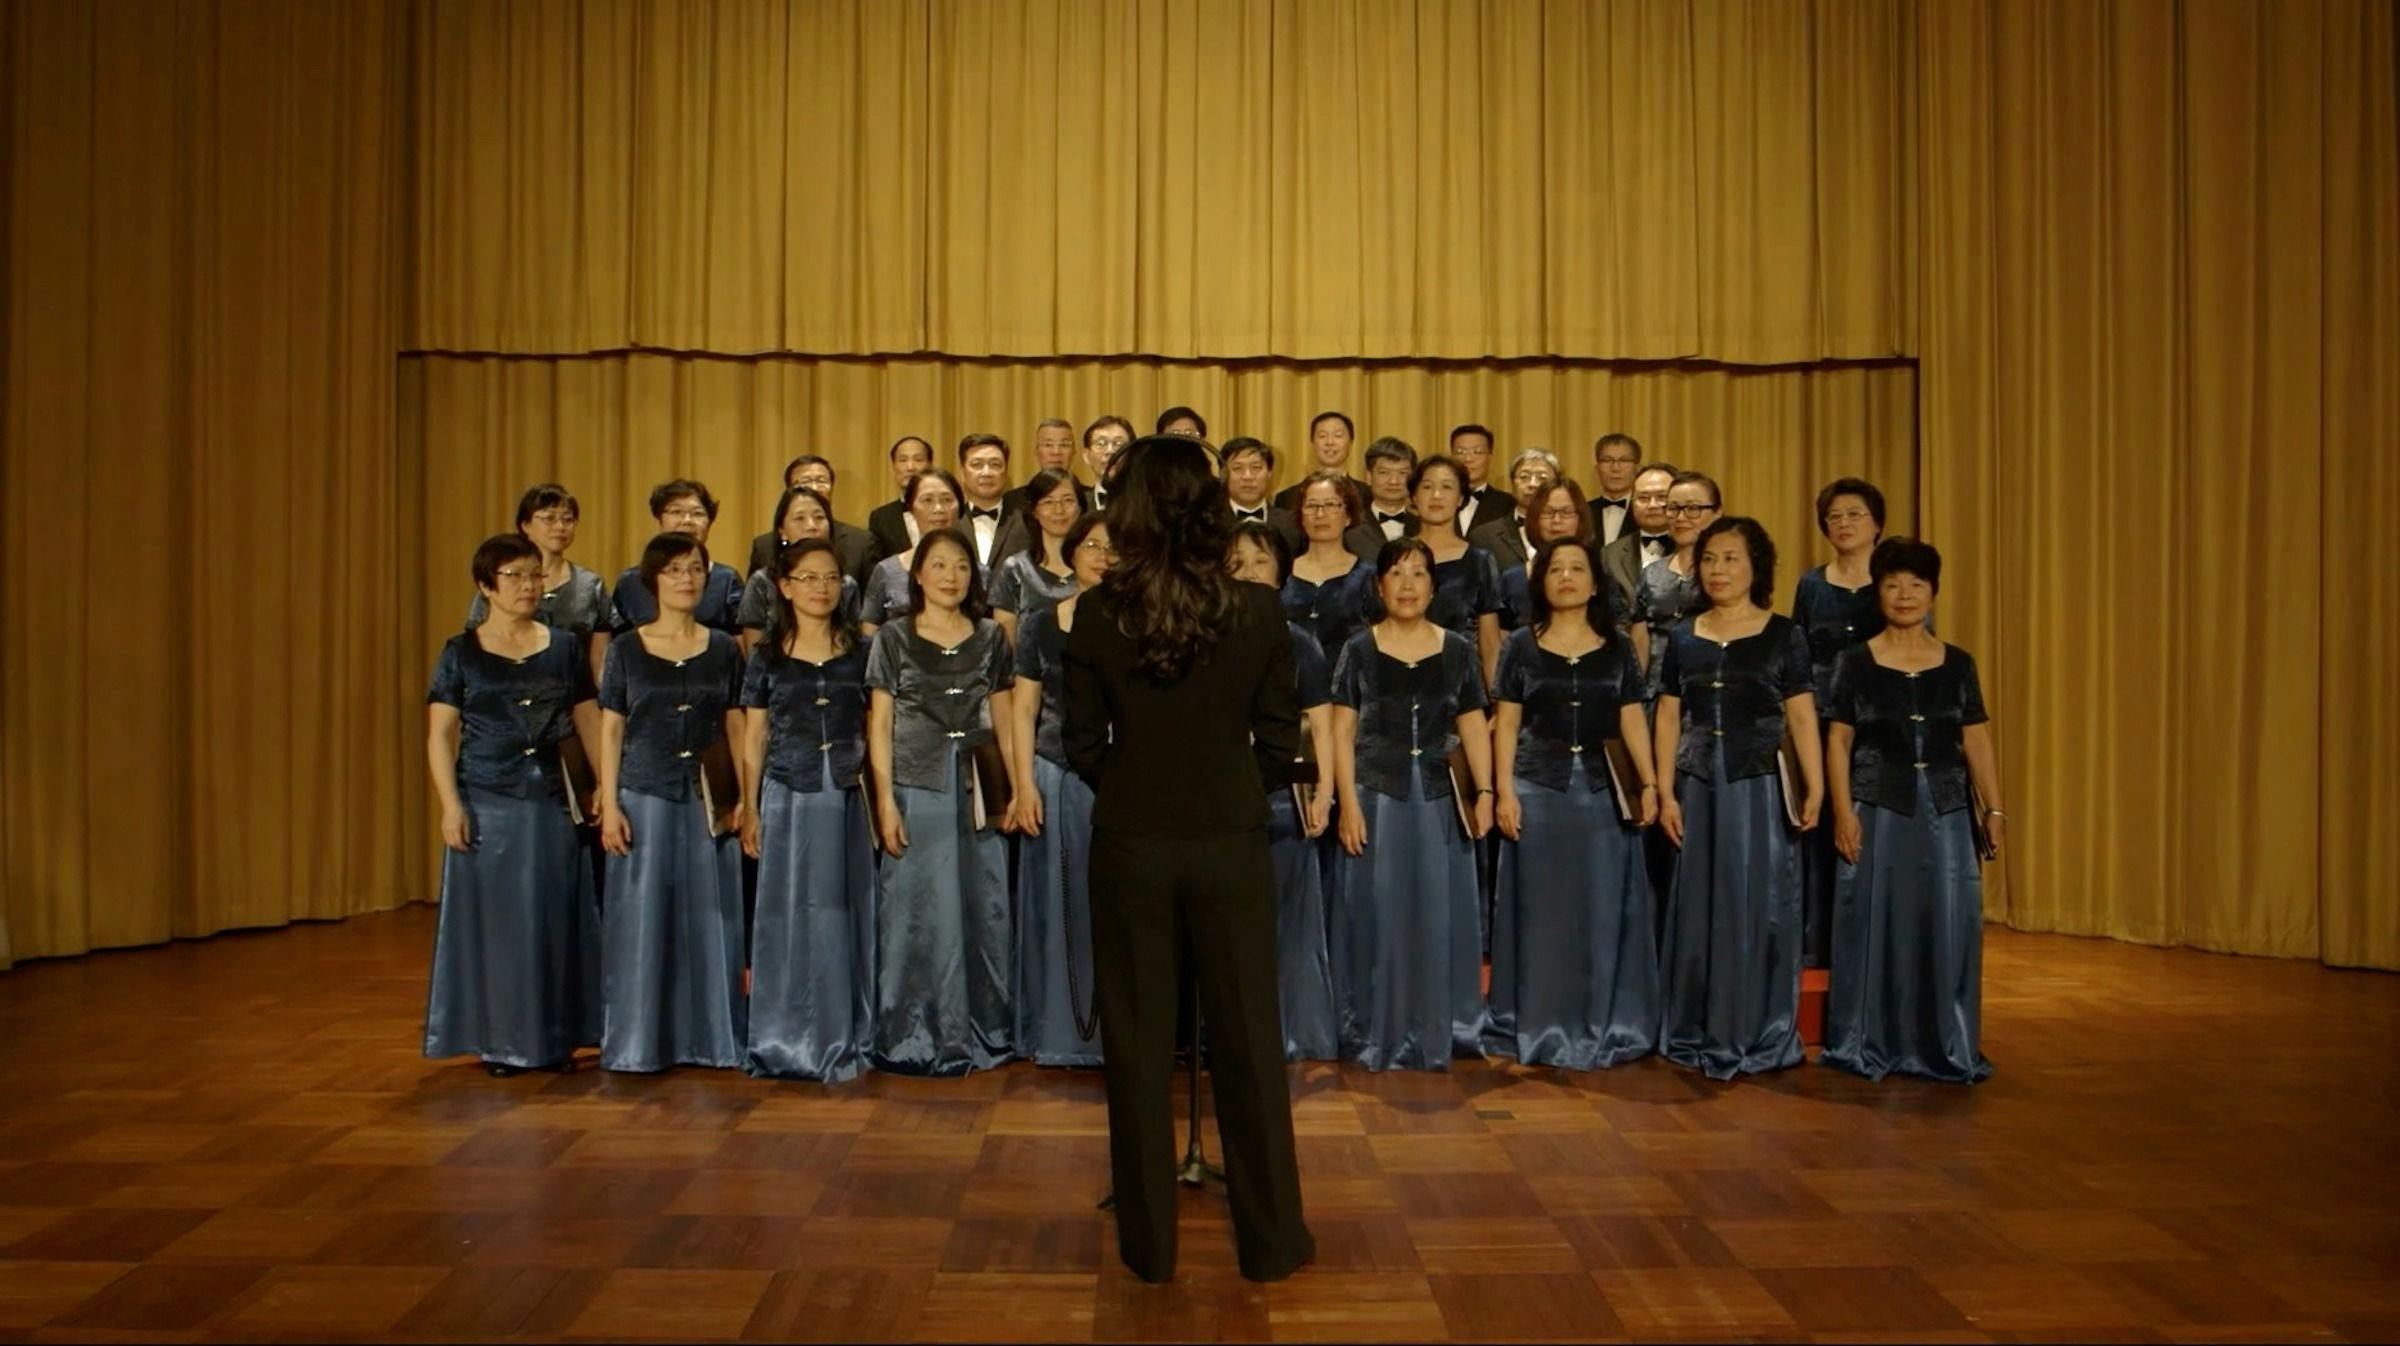 A image of people in Beijing, China singing in a choir. We can see their whole bodies and they are wearing grey floor length dresses